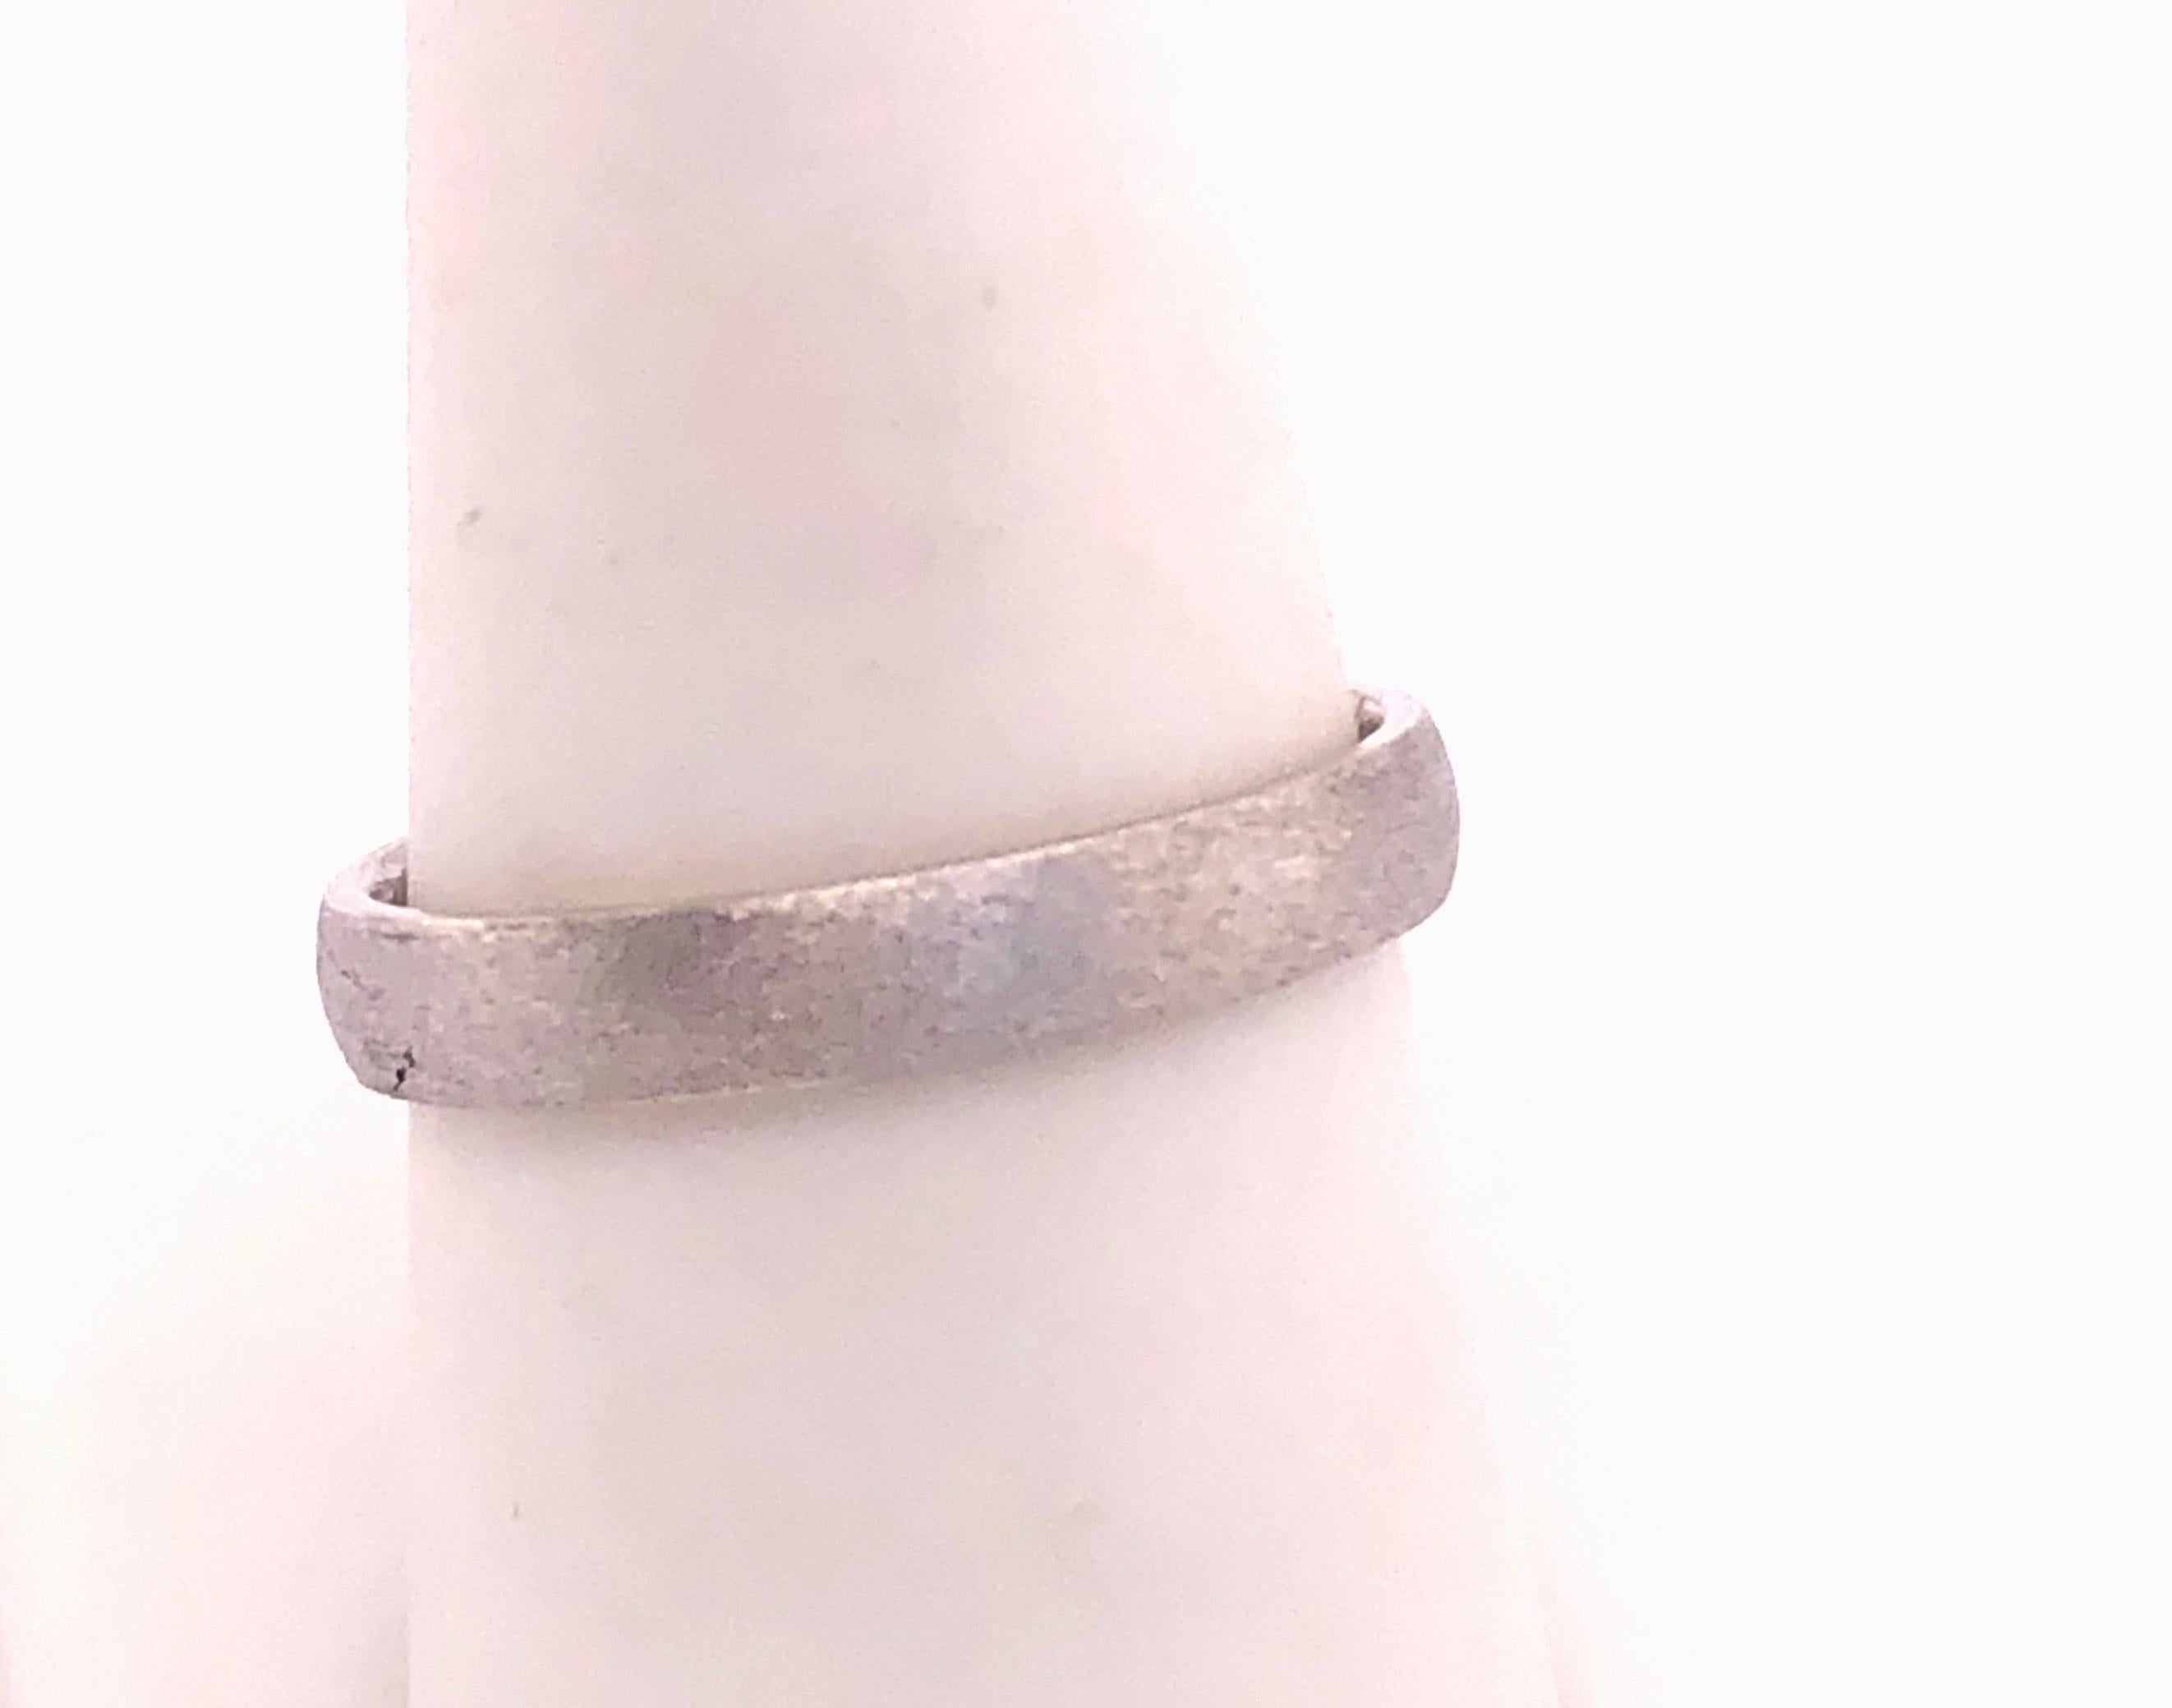 14Kt White Gold Art Carved Band Ring Size 9 with 3.73 grams total weight